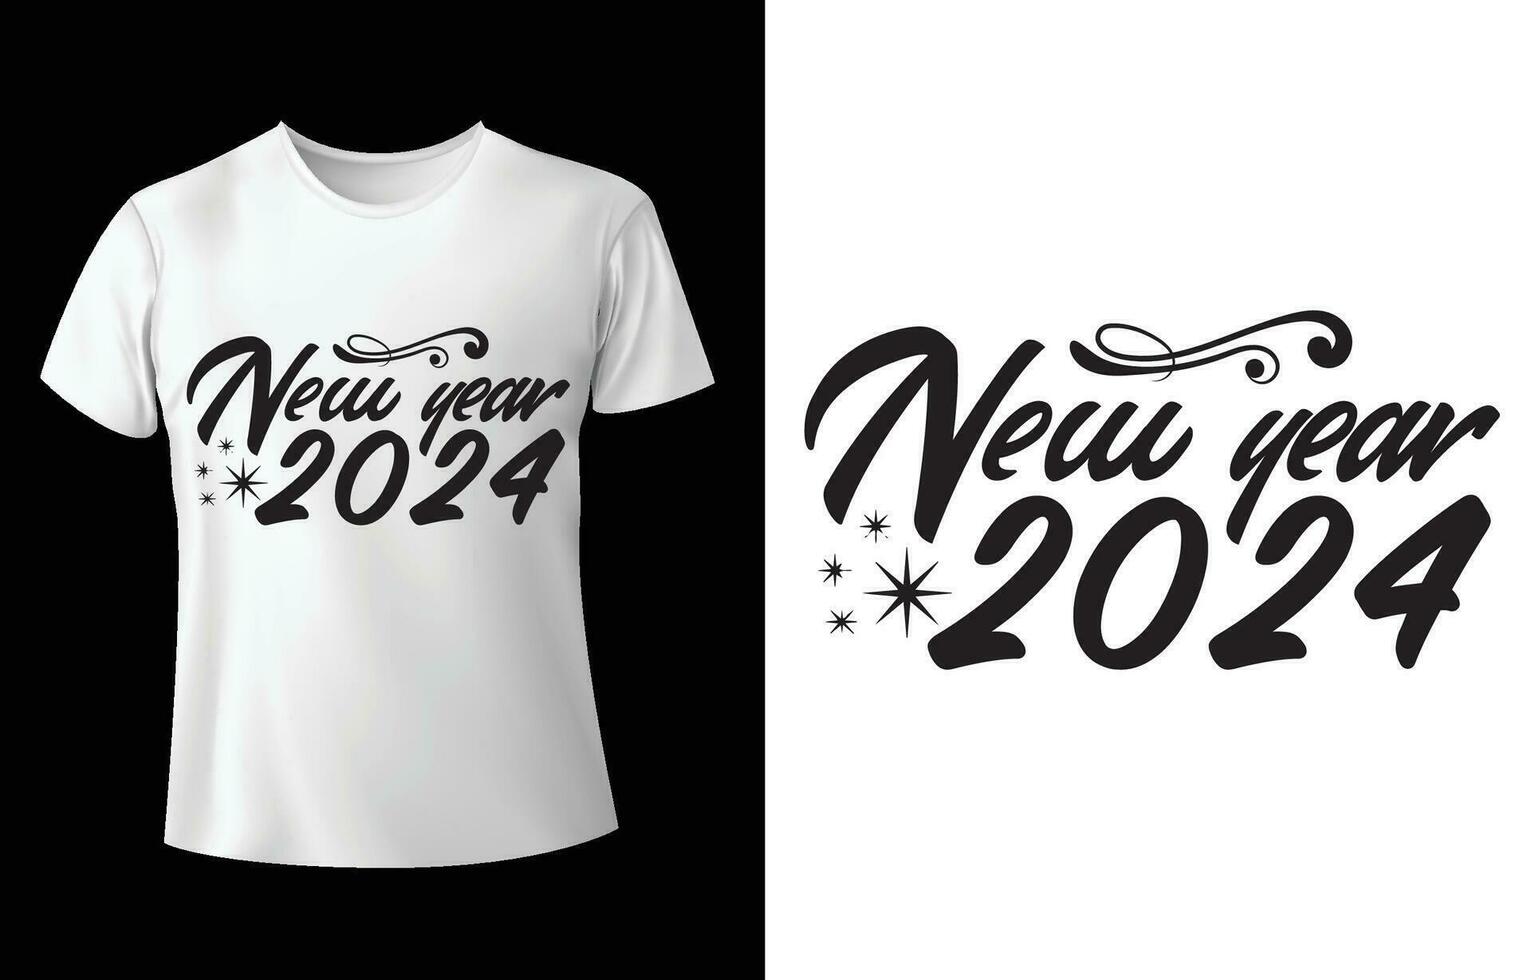 Happy new year retro type design for t-shirt, cards, frame artwork, bags, mugs, stickers, tumblers, phone cases, print etc. vector